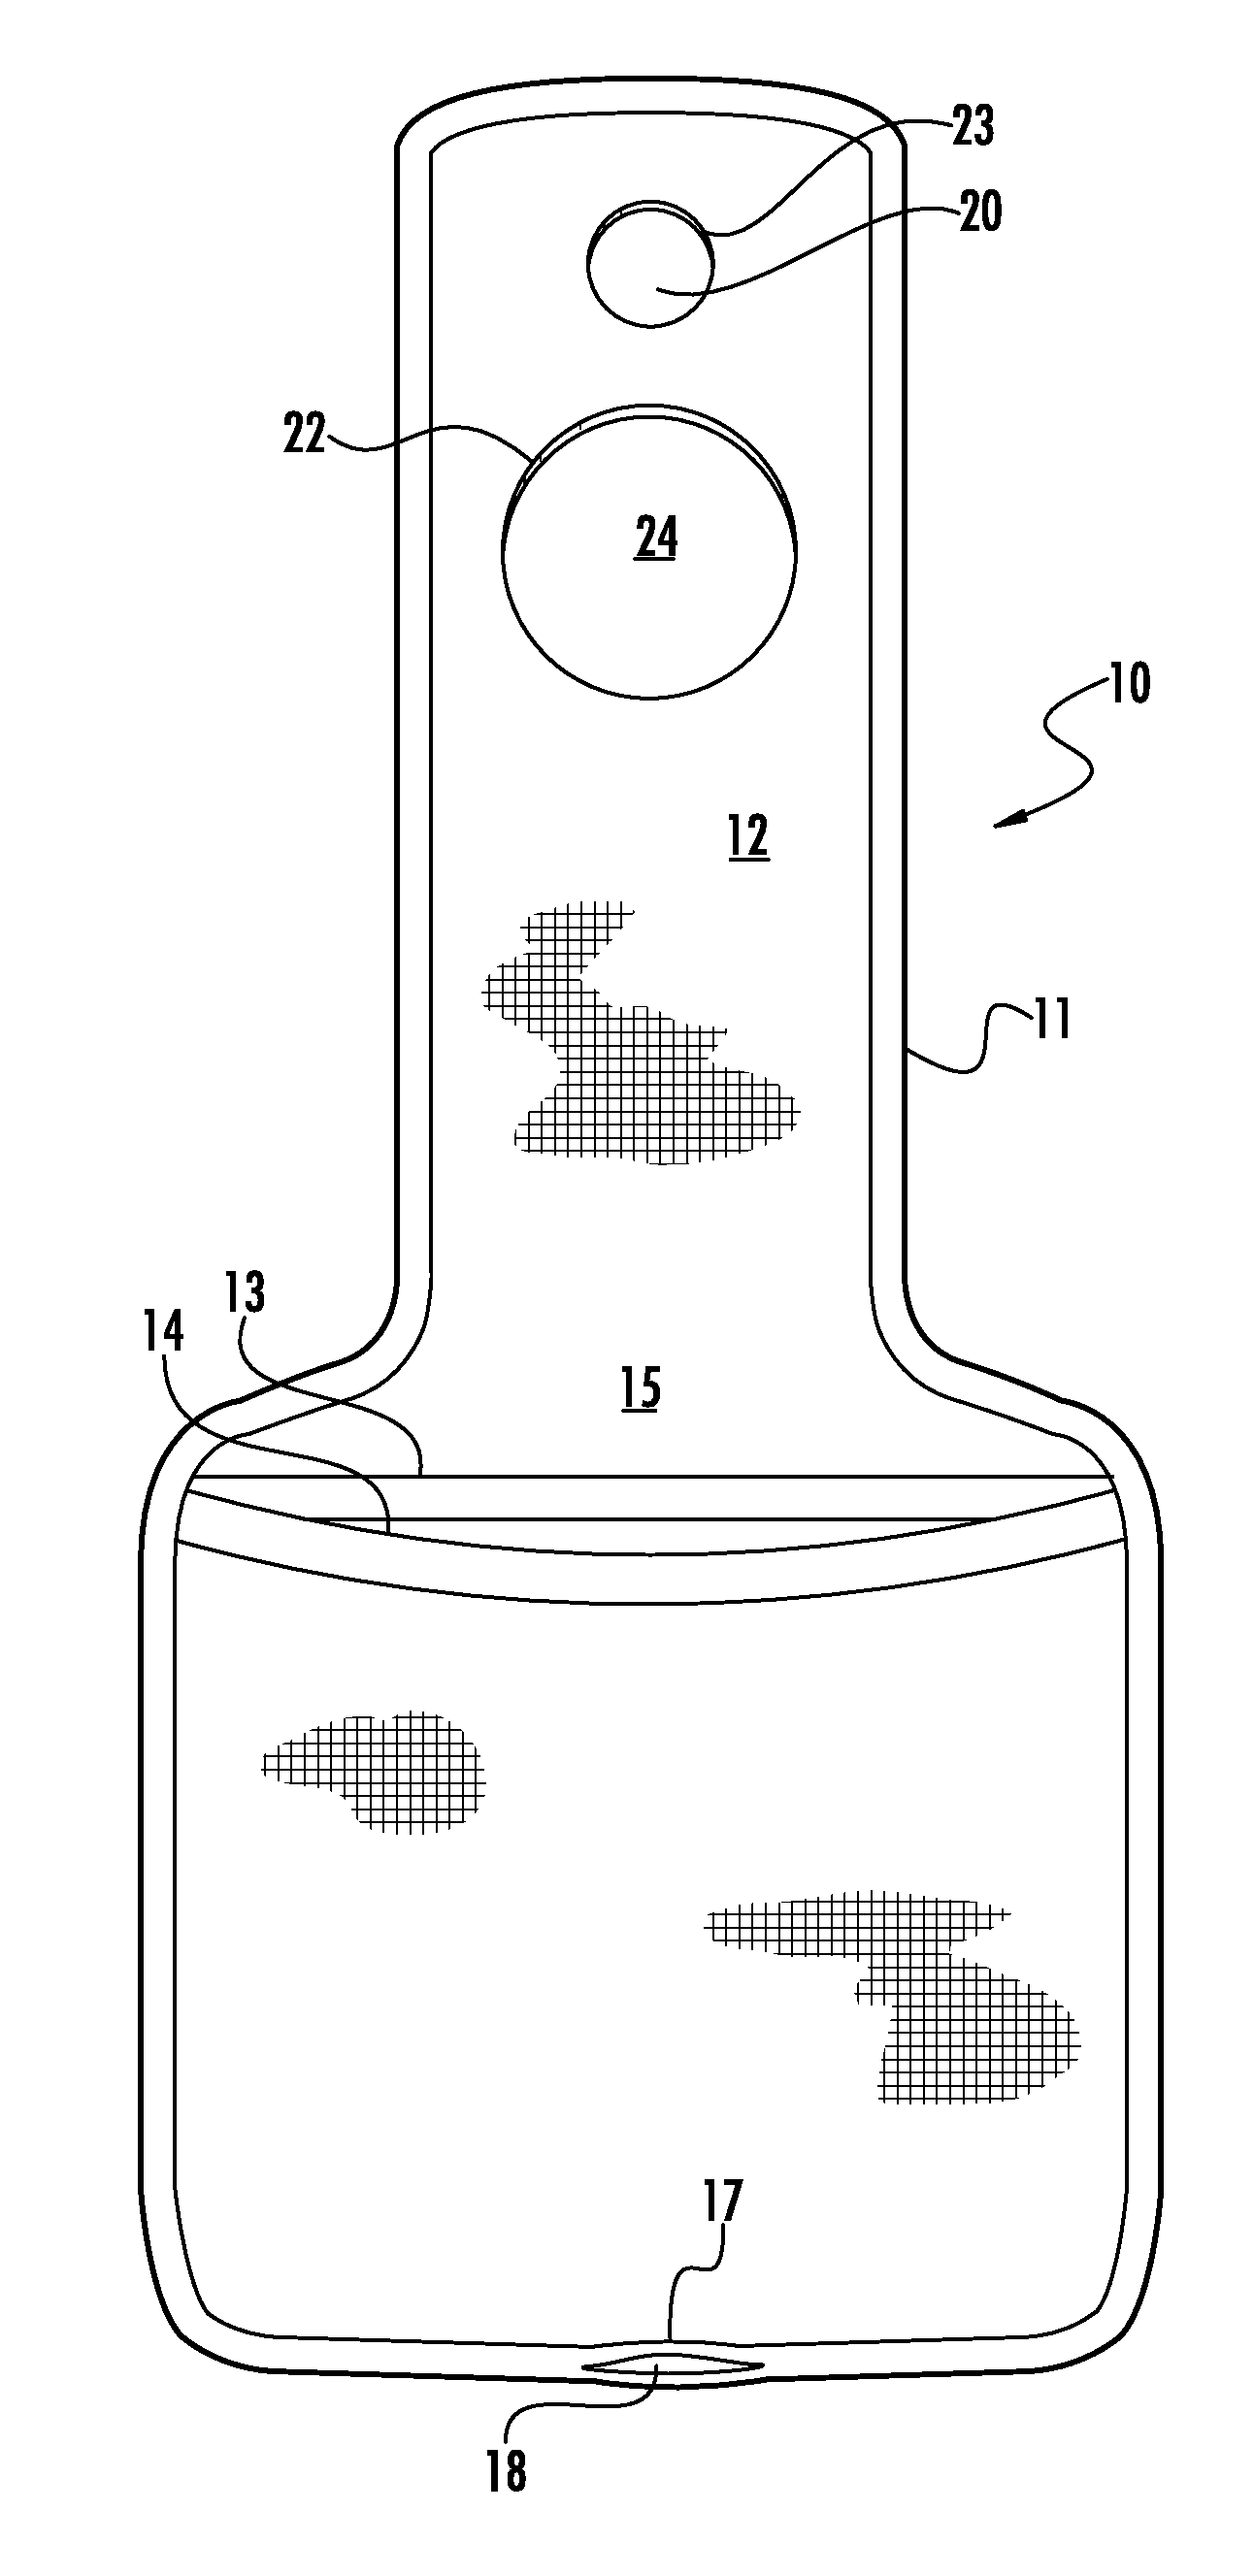 Removably attachable storage device